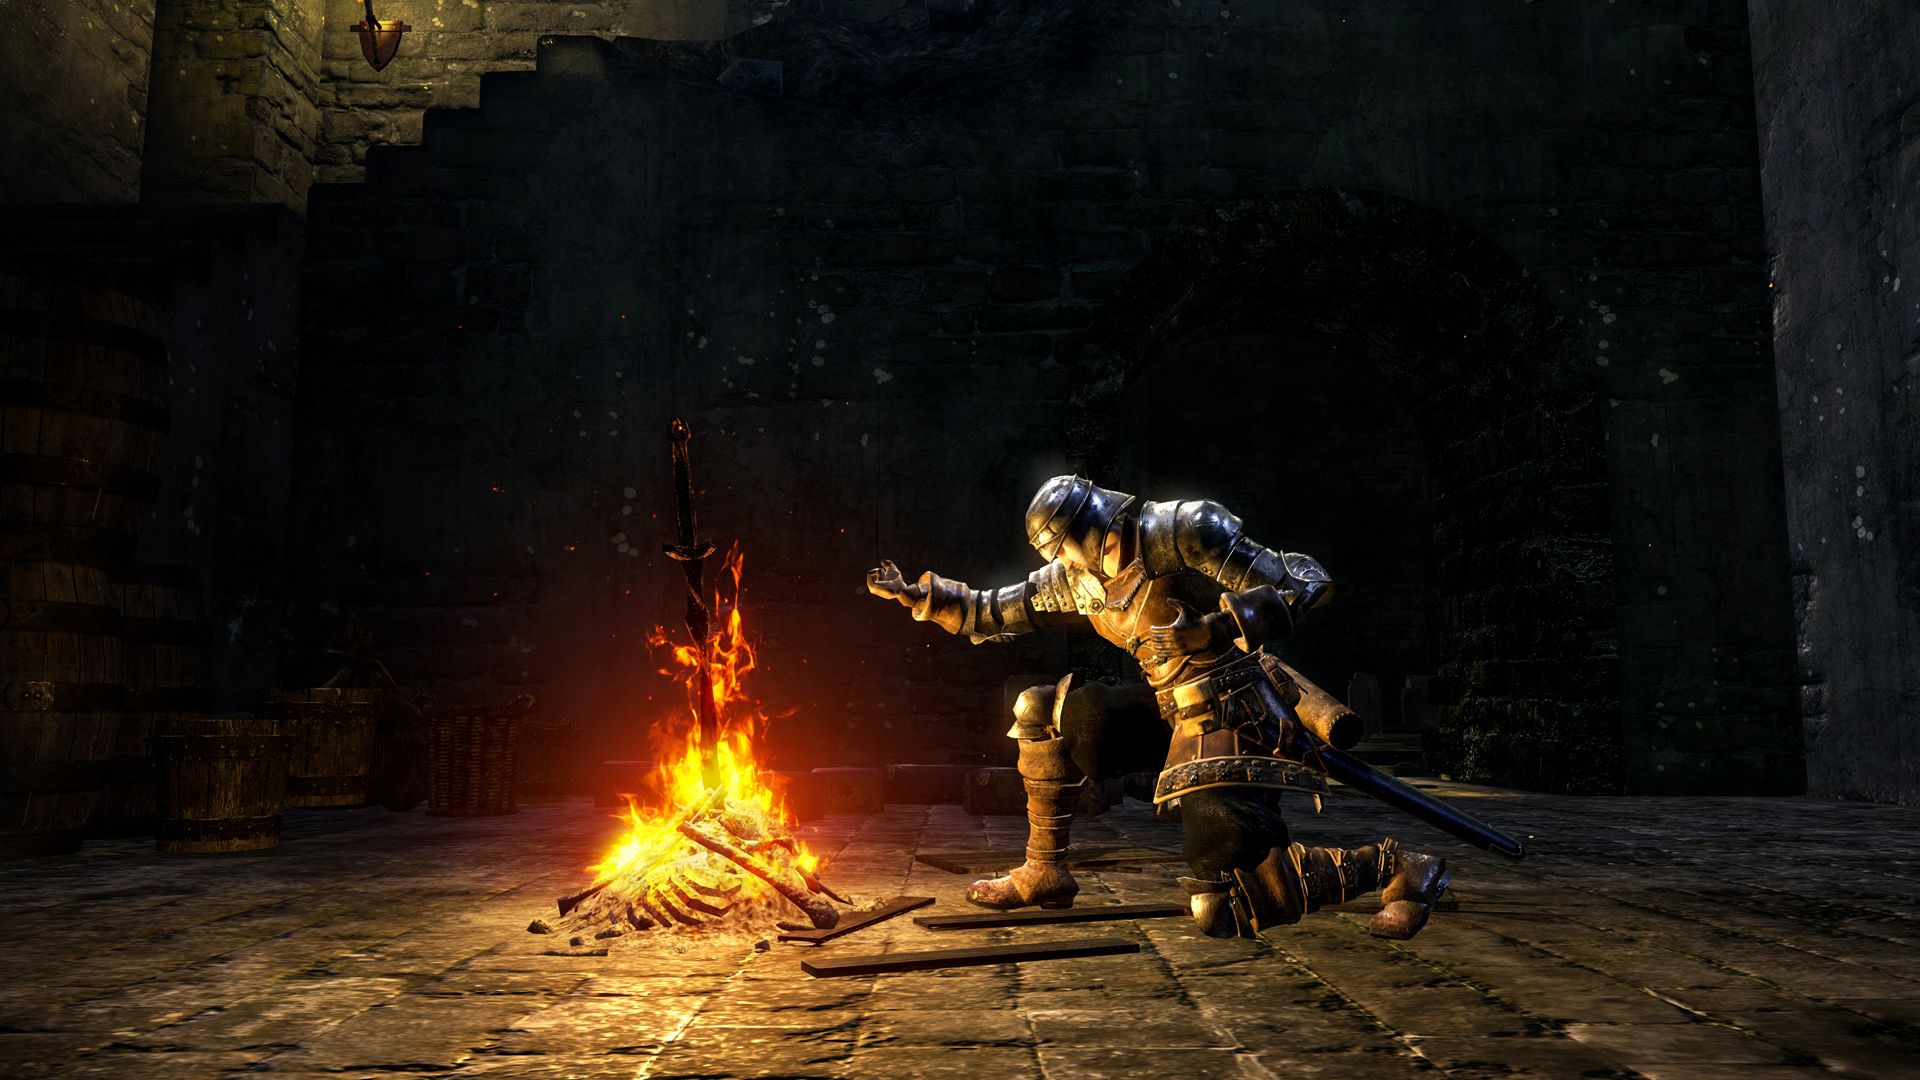 Dark Souls 2's next big update will introduce the Scholar of the First Sin